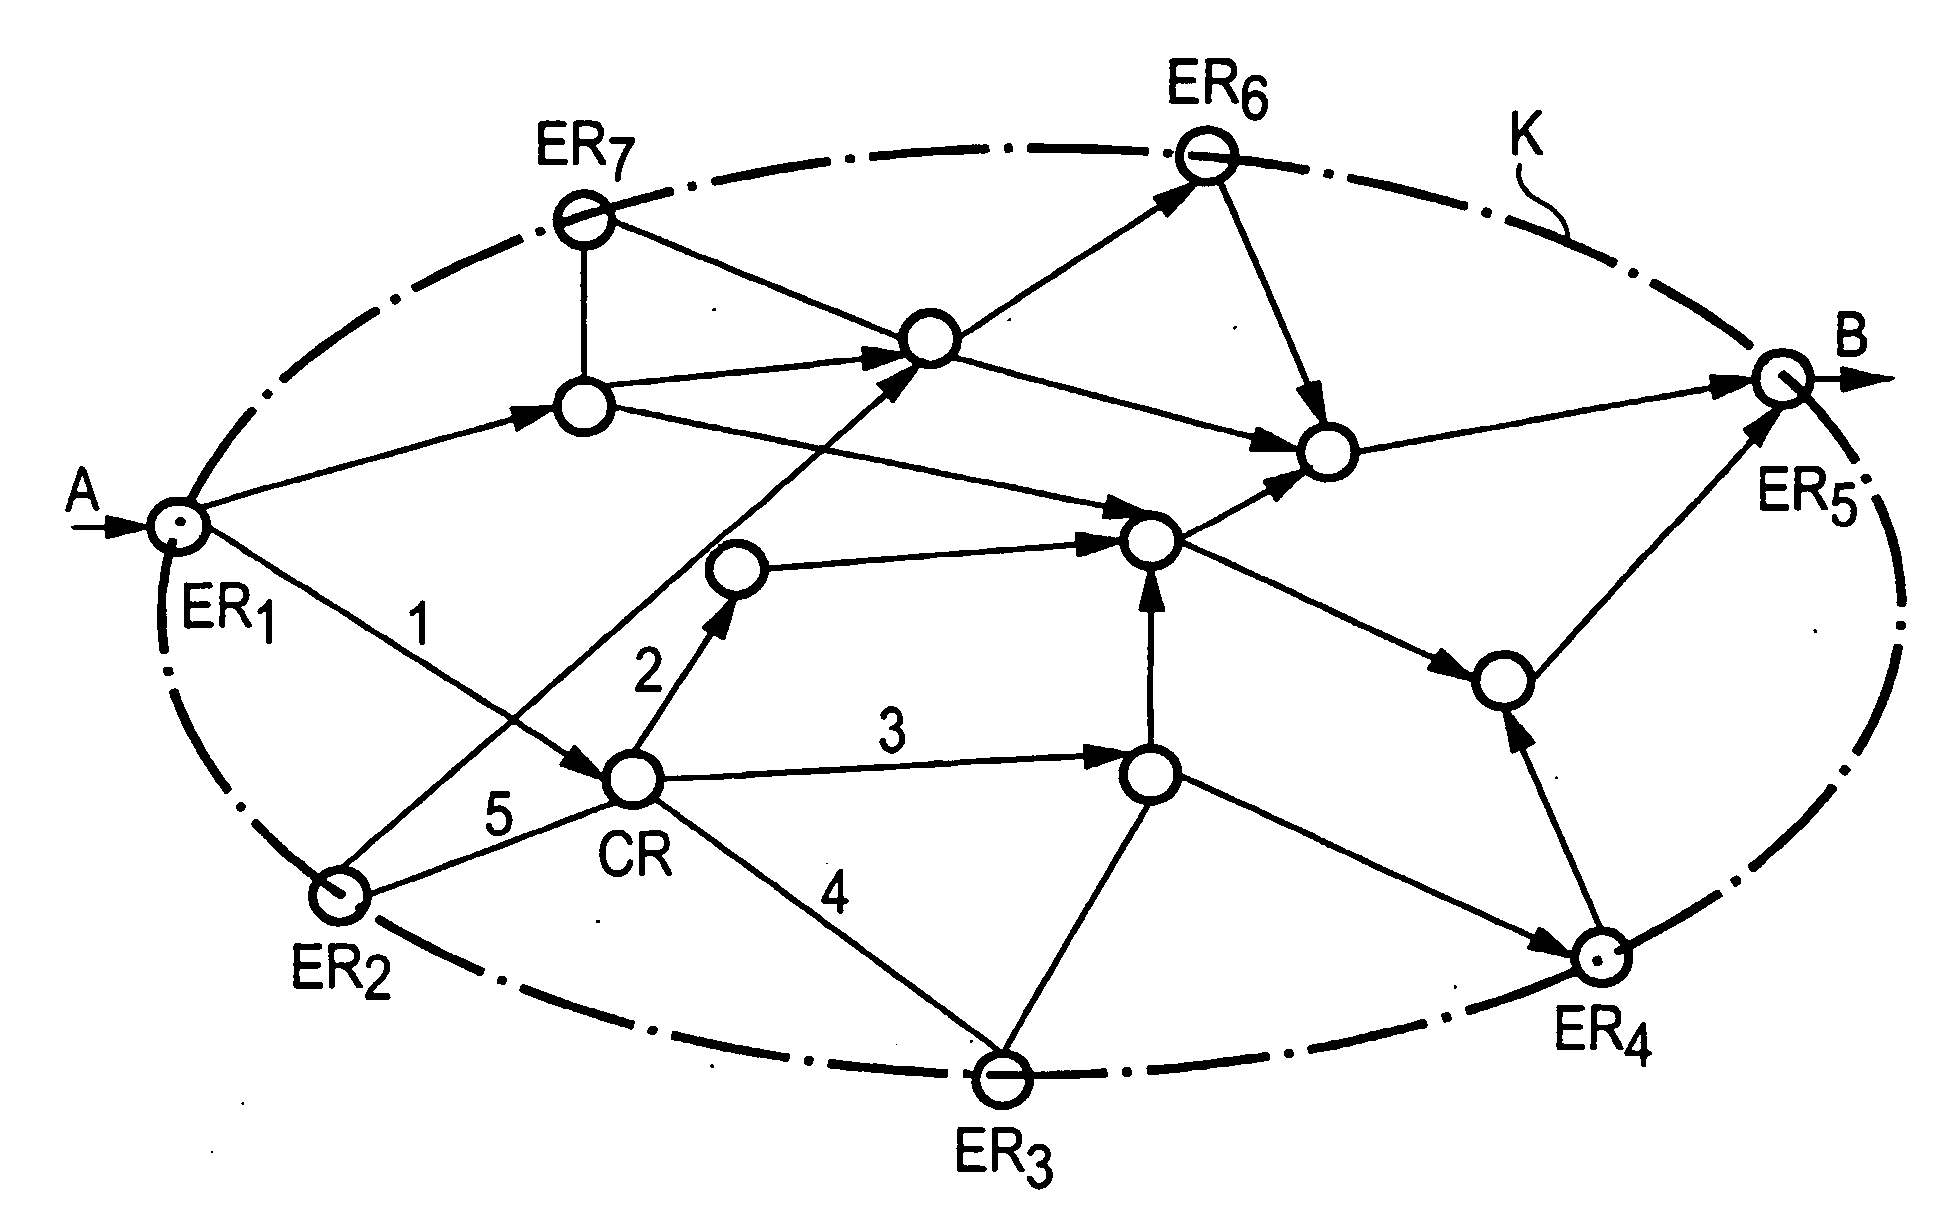 Method for selecting useful routes in a router for even traffic distribution in a communications network